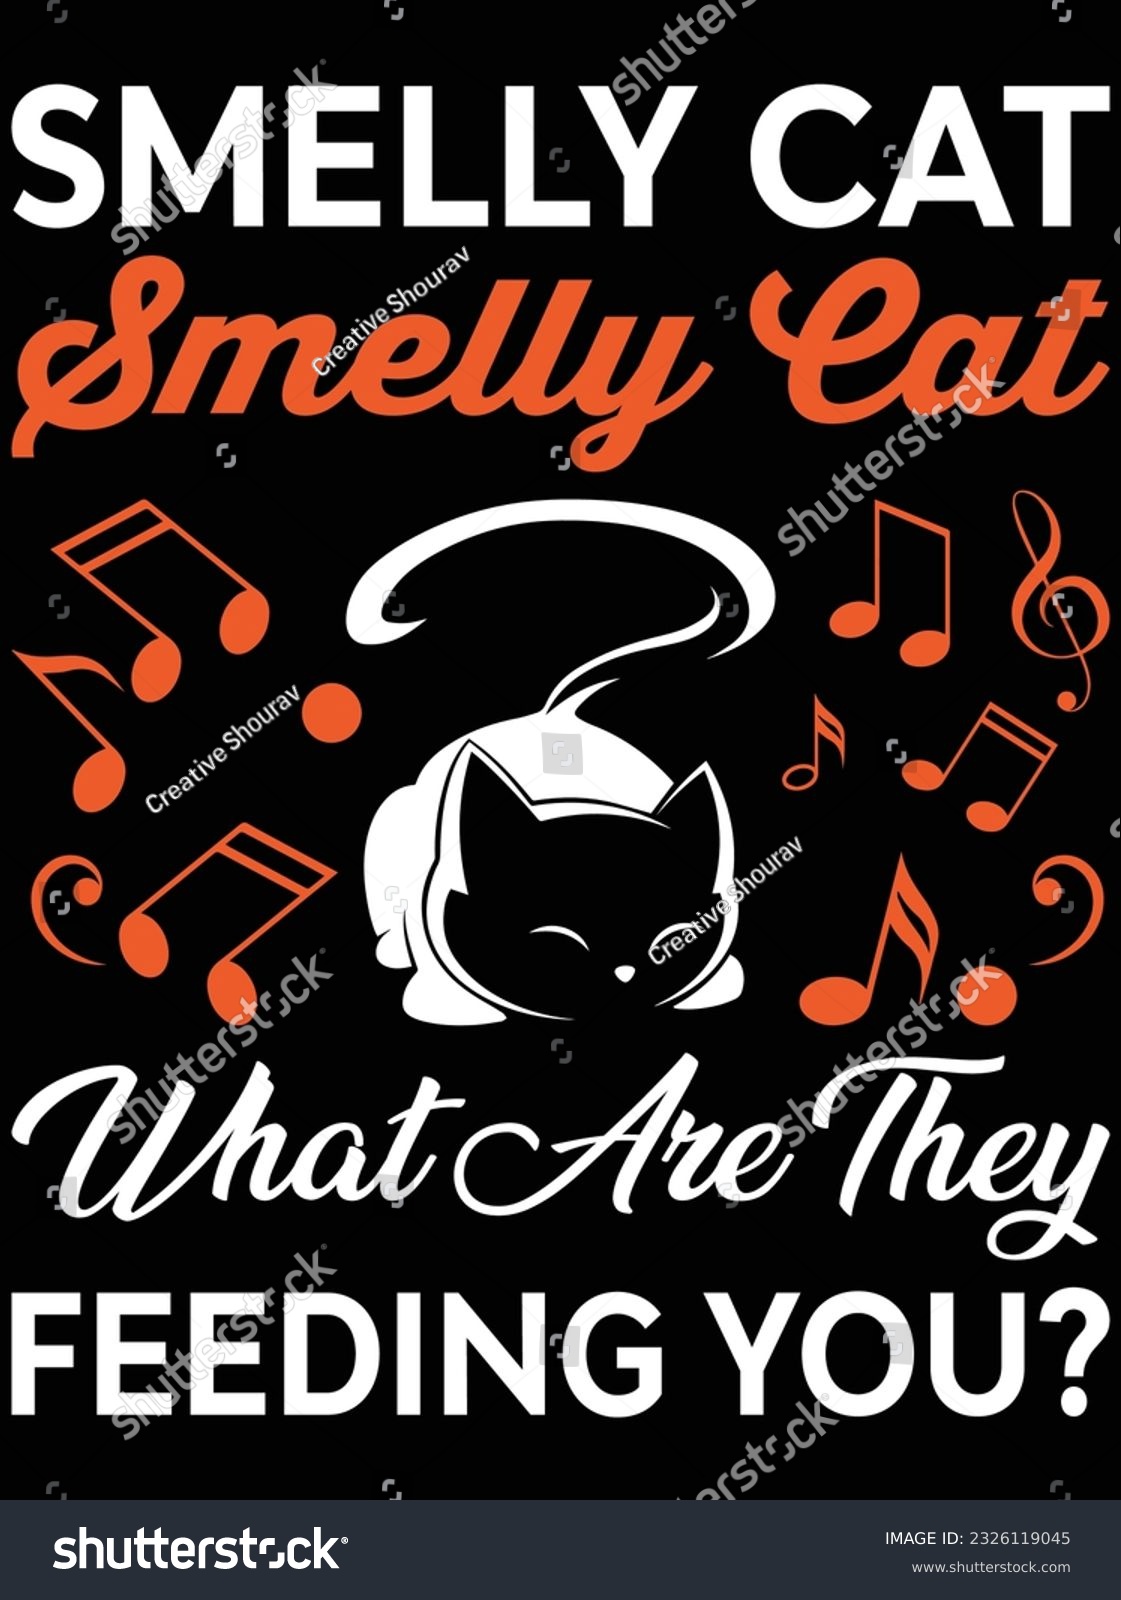 SVG of Smelly cat what are they feeding you vector art design, eps file. design file for t-shirt. SVG, EPS cuttable design file svg